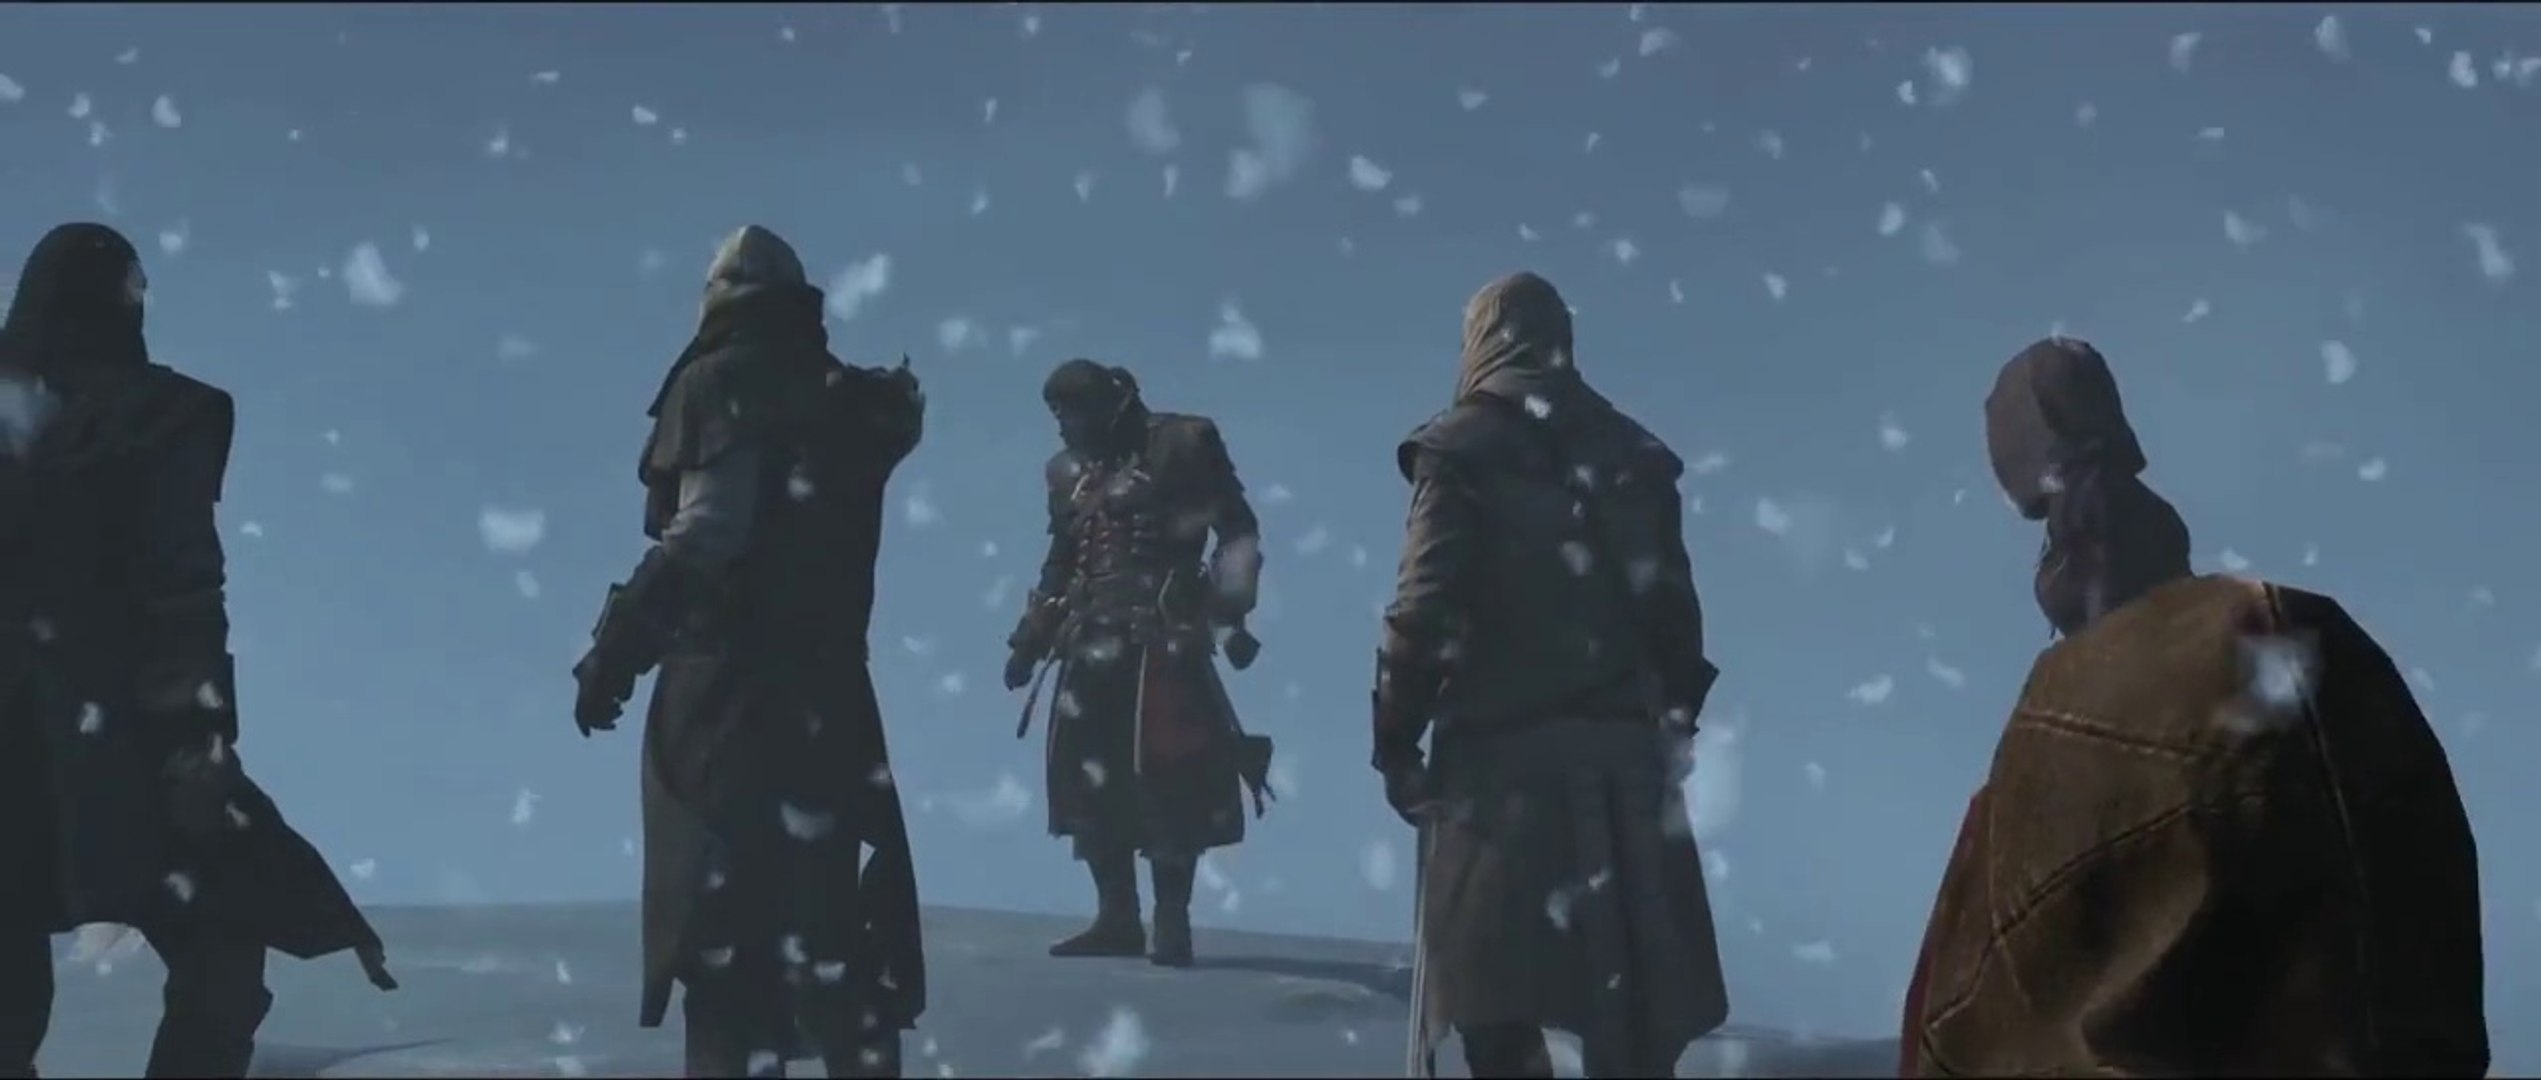 Assassin's Creed Rogue - Gameplay Launch Trailer XBOX 360/PS3 (HD) - video  Dailymotion